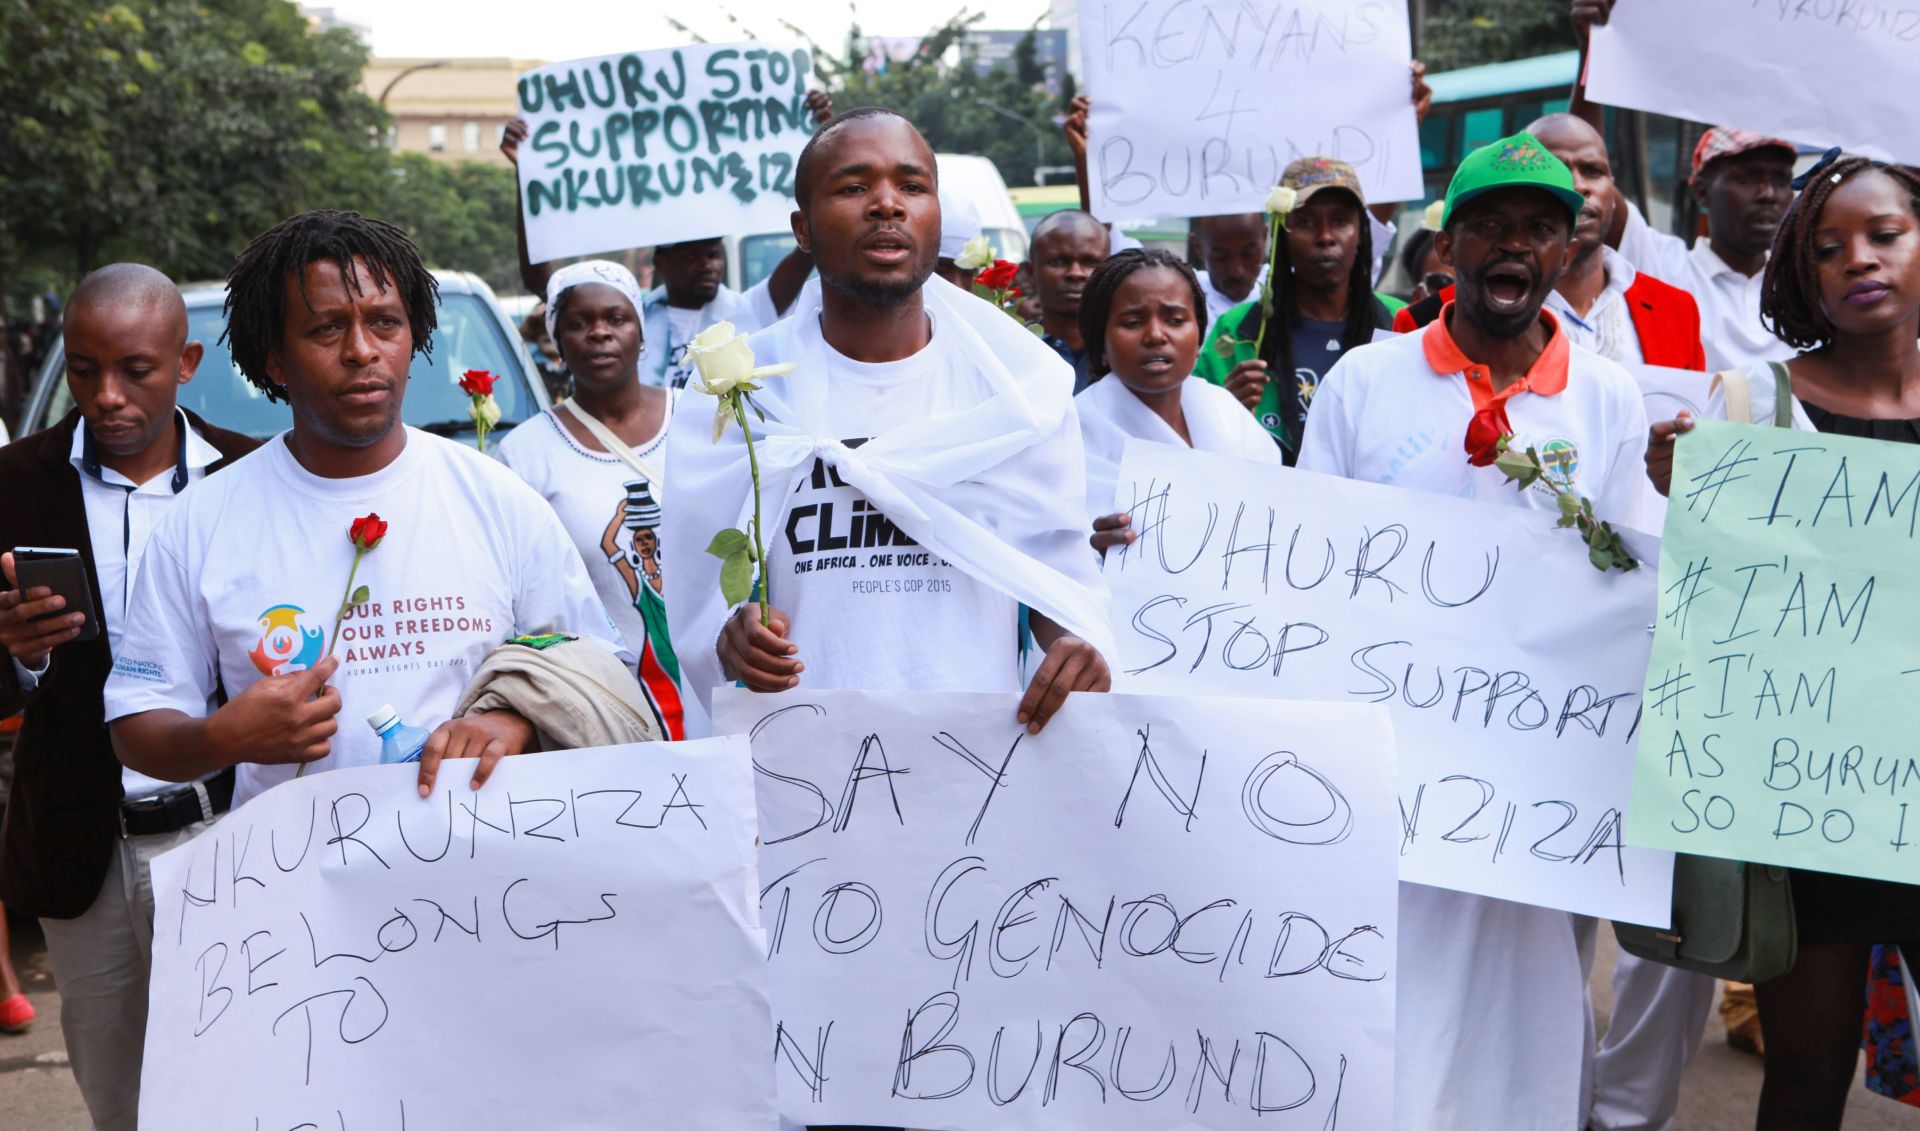 epa05074202 Kenyan activists and Burundians hold flowers and placards during a protest against killings in Burundi, in Nairobi, Kenya, 18 December 2015. Kenyans and Burundian nationals marched to the Burundian Embassy to Kenya to condemn the violence between police and opposition groups since April, when President Pierre Nkurunziza announced he would seek a third term in office. Human rights activists say more than 240 people have been killed in protests and attacks since April, while more than 220,000 are believed to have fled the country. The African Union said on 17 December 2015, it would not allow genocide to take place in Burundi.  EPA/DANIEL IRUNGU